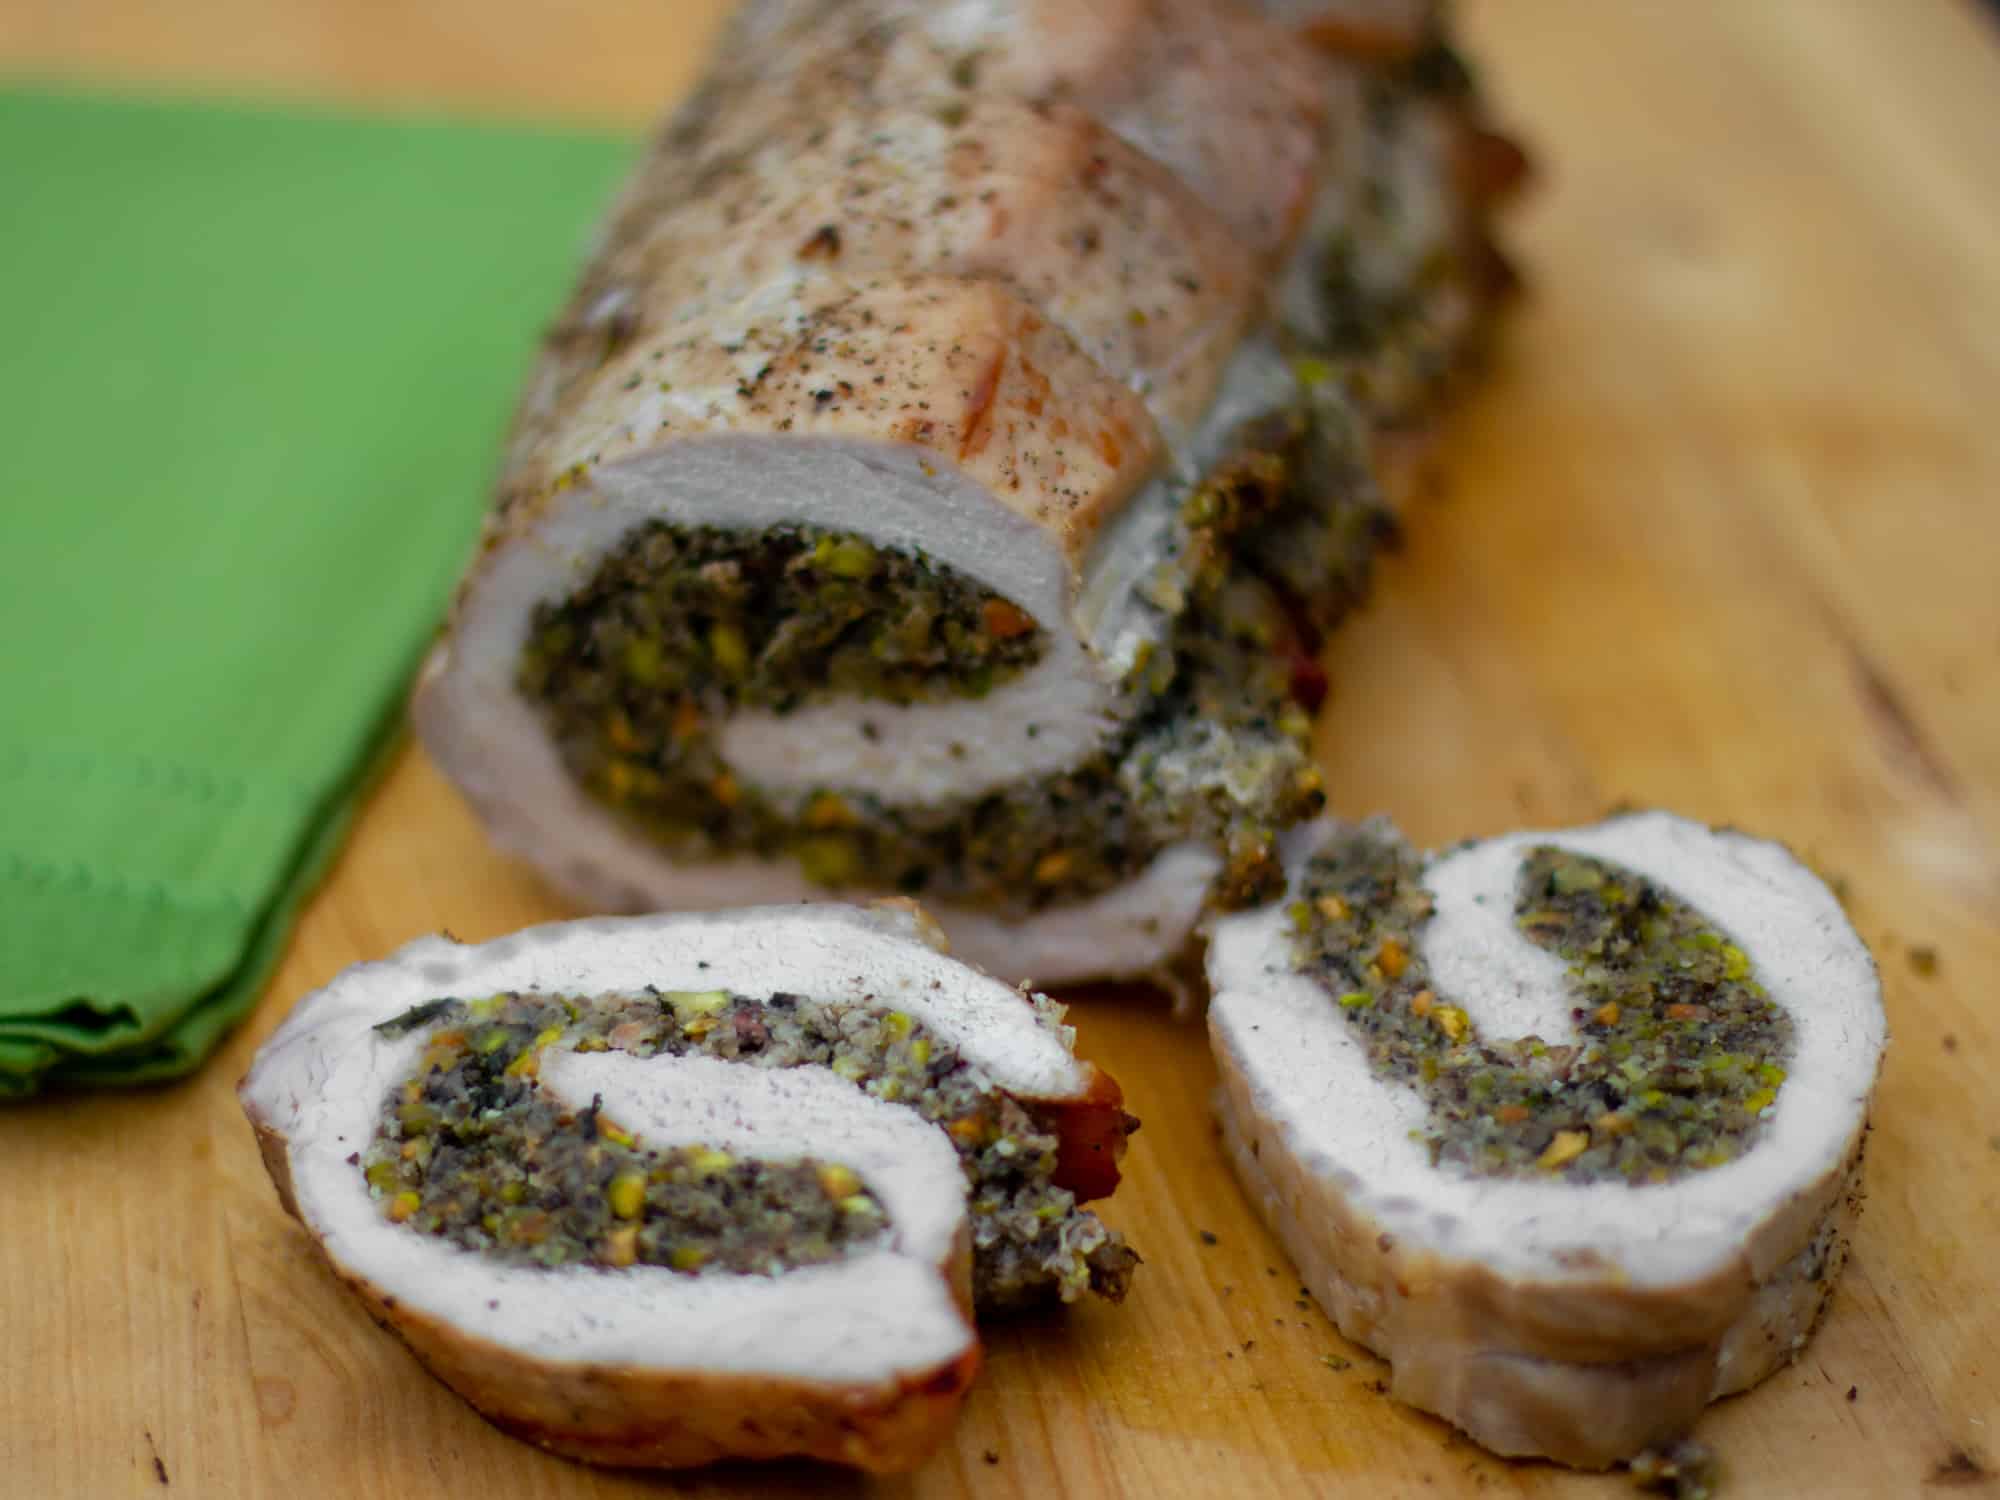 A butterflied boneless pork loin stuffed with duxelles type stuffing with sauteed mushrooms, shallots, pistachios, parmesan cheese and fresh oregano. How to instructions to butterfly a pork loin.